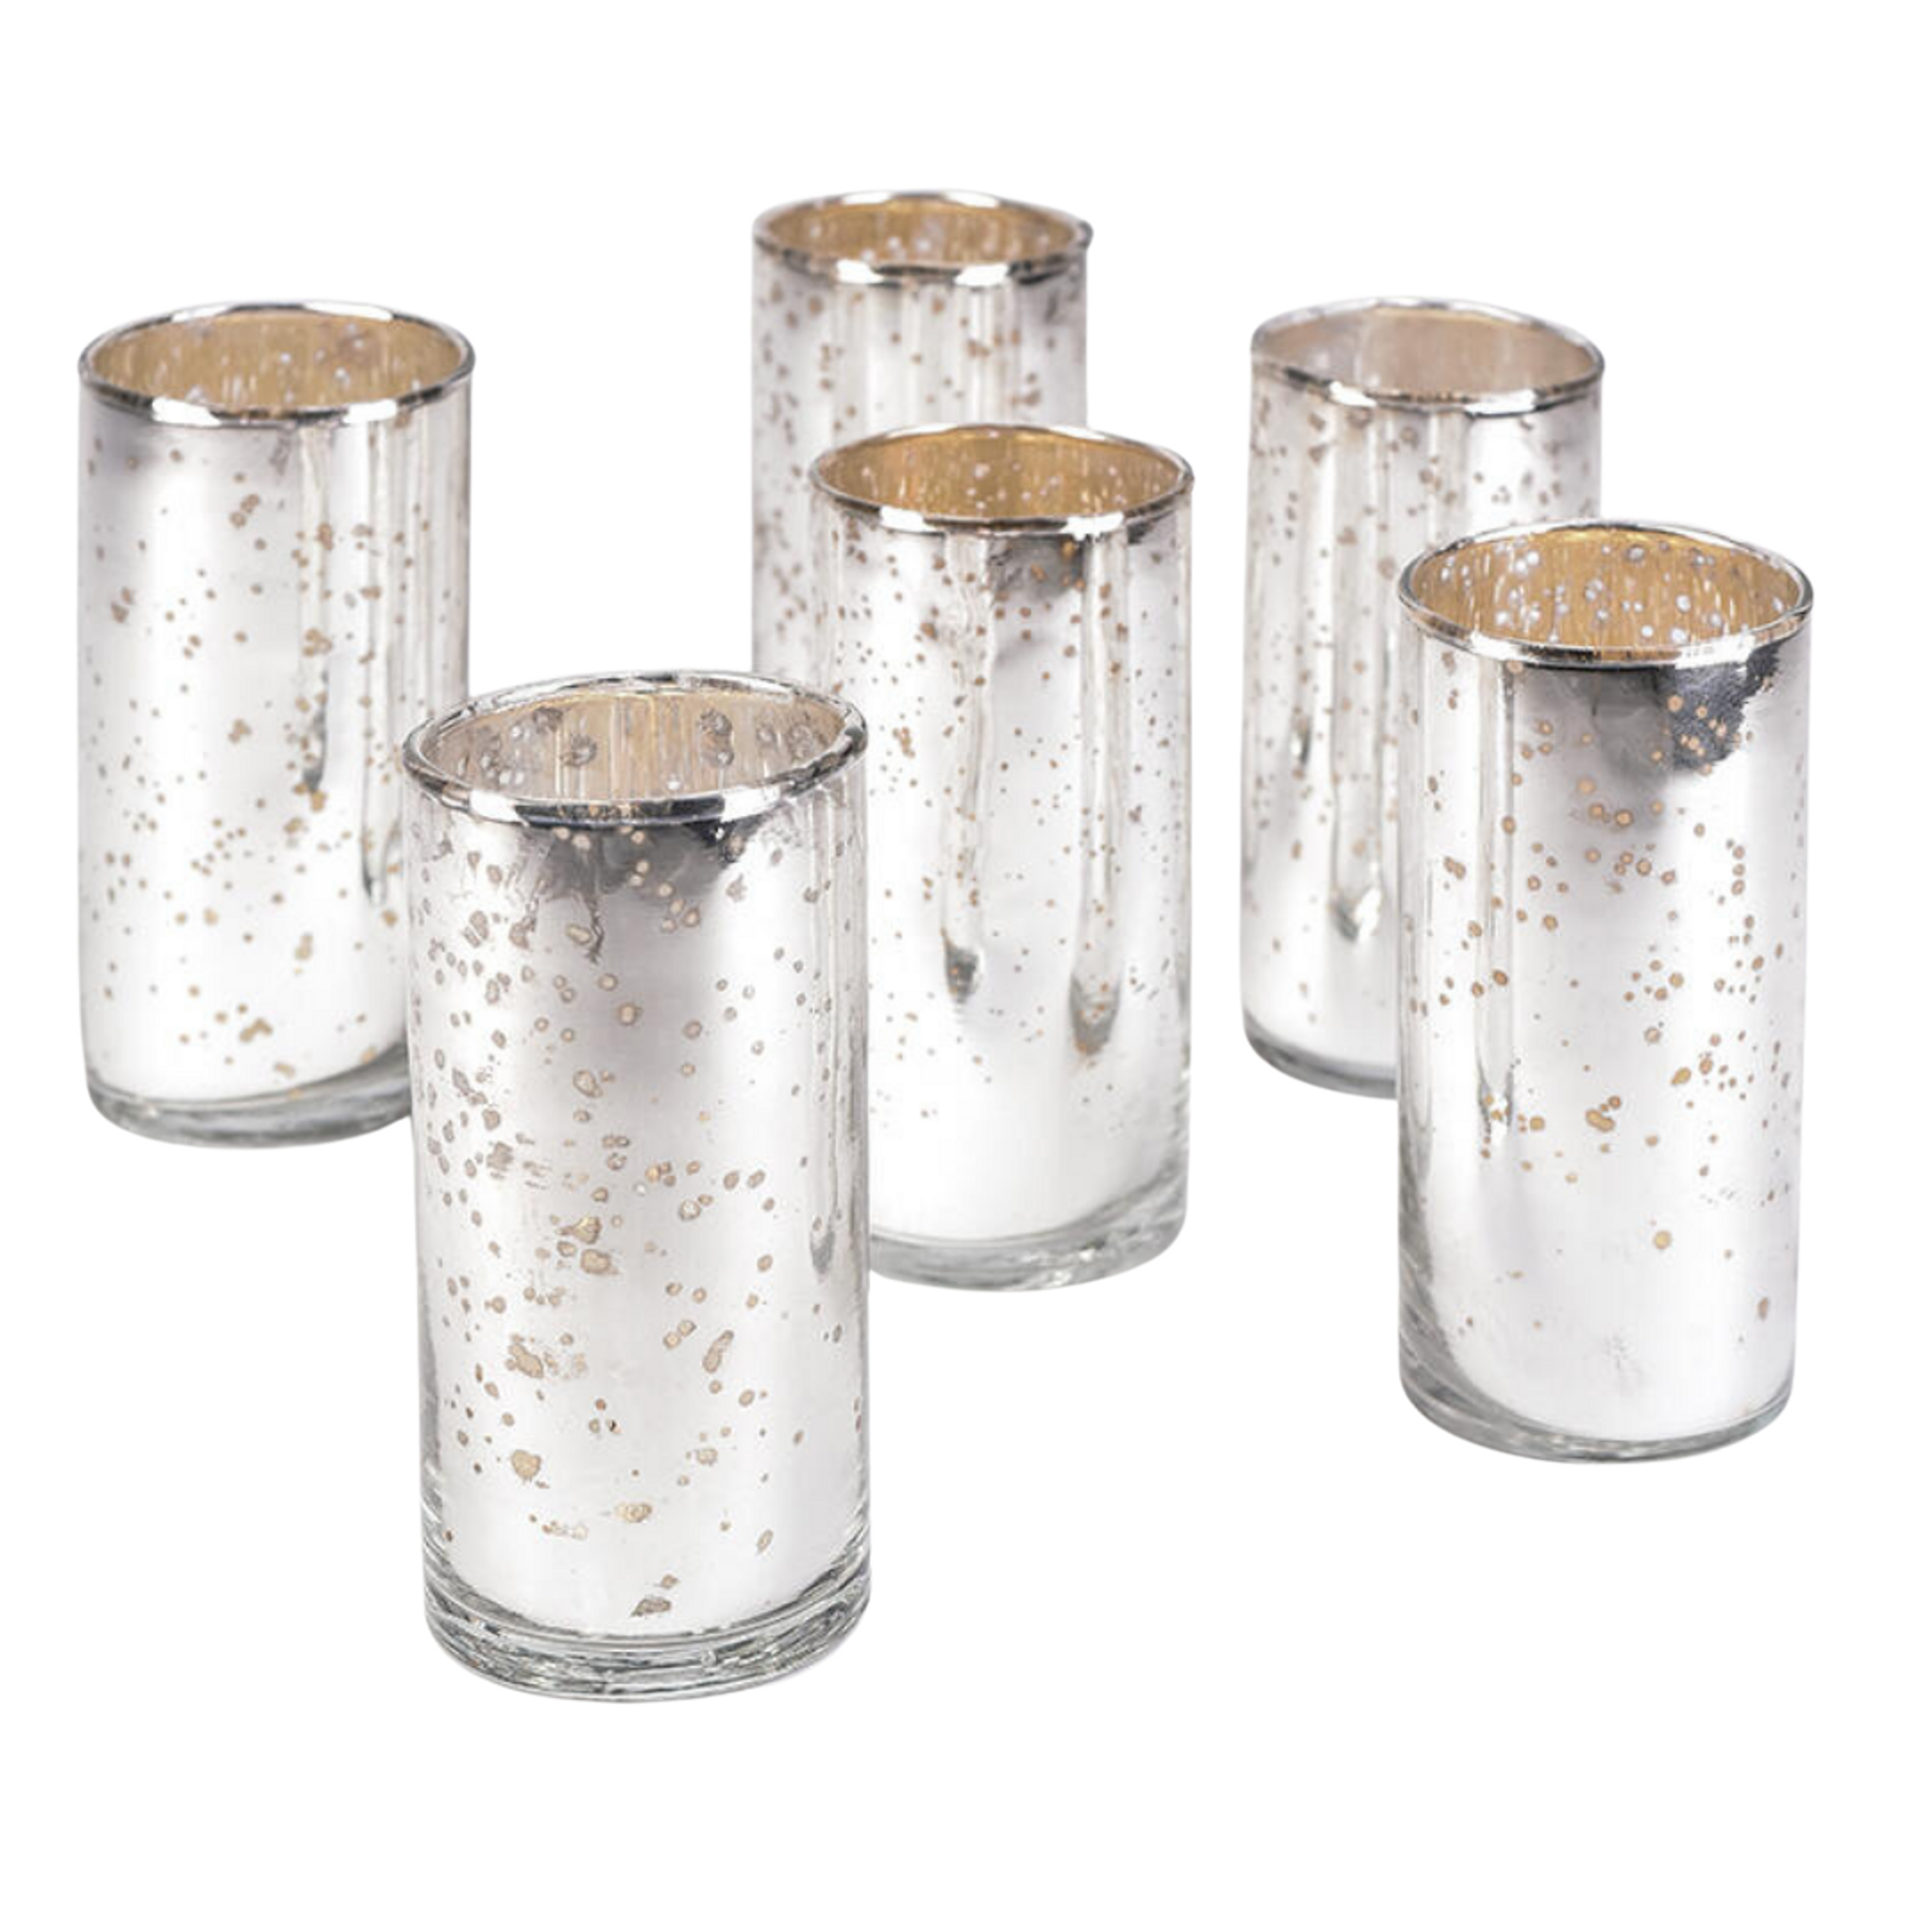 Antiqued Silver Glass Narrow Votive Holders, Set of 6